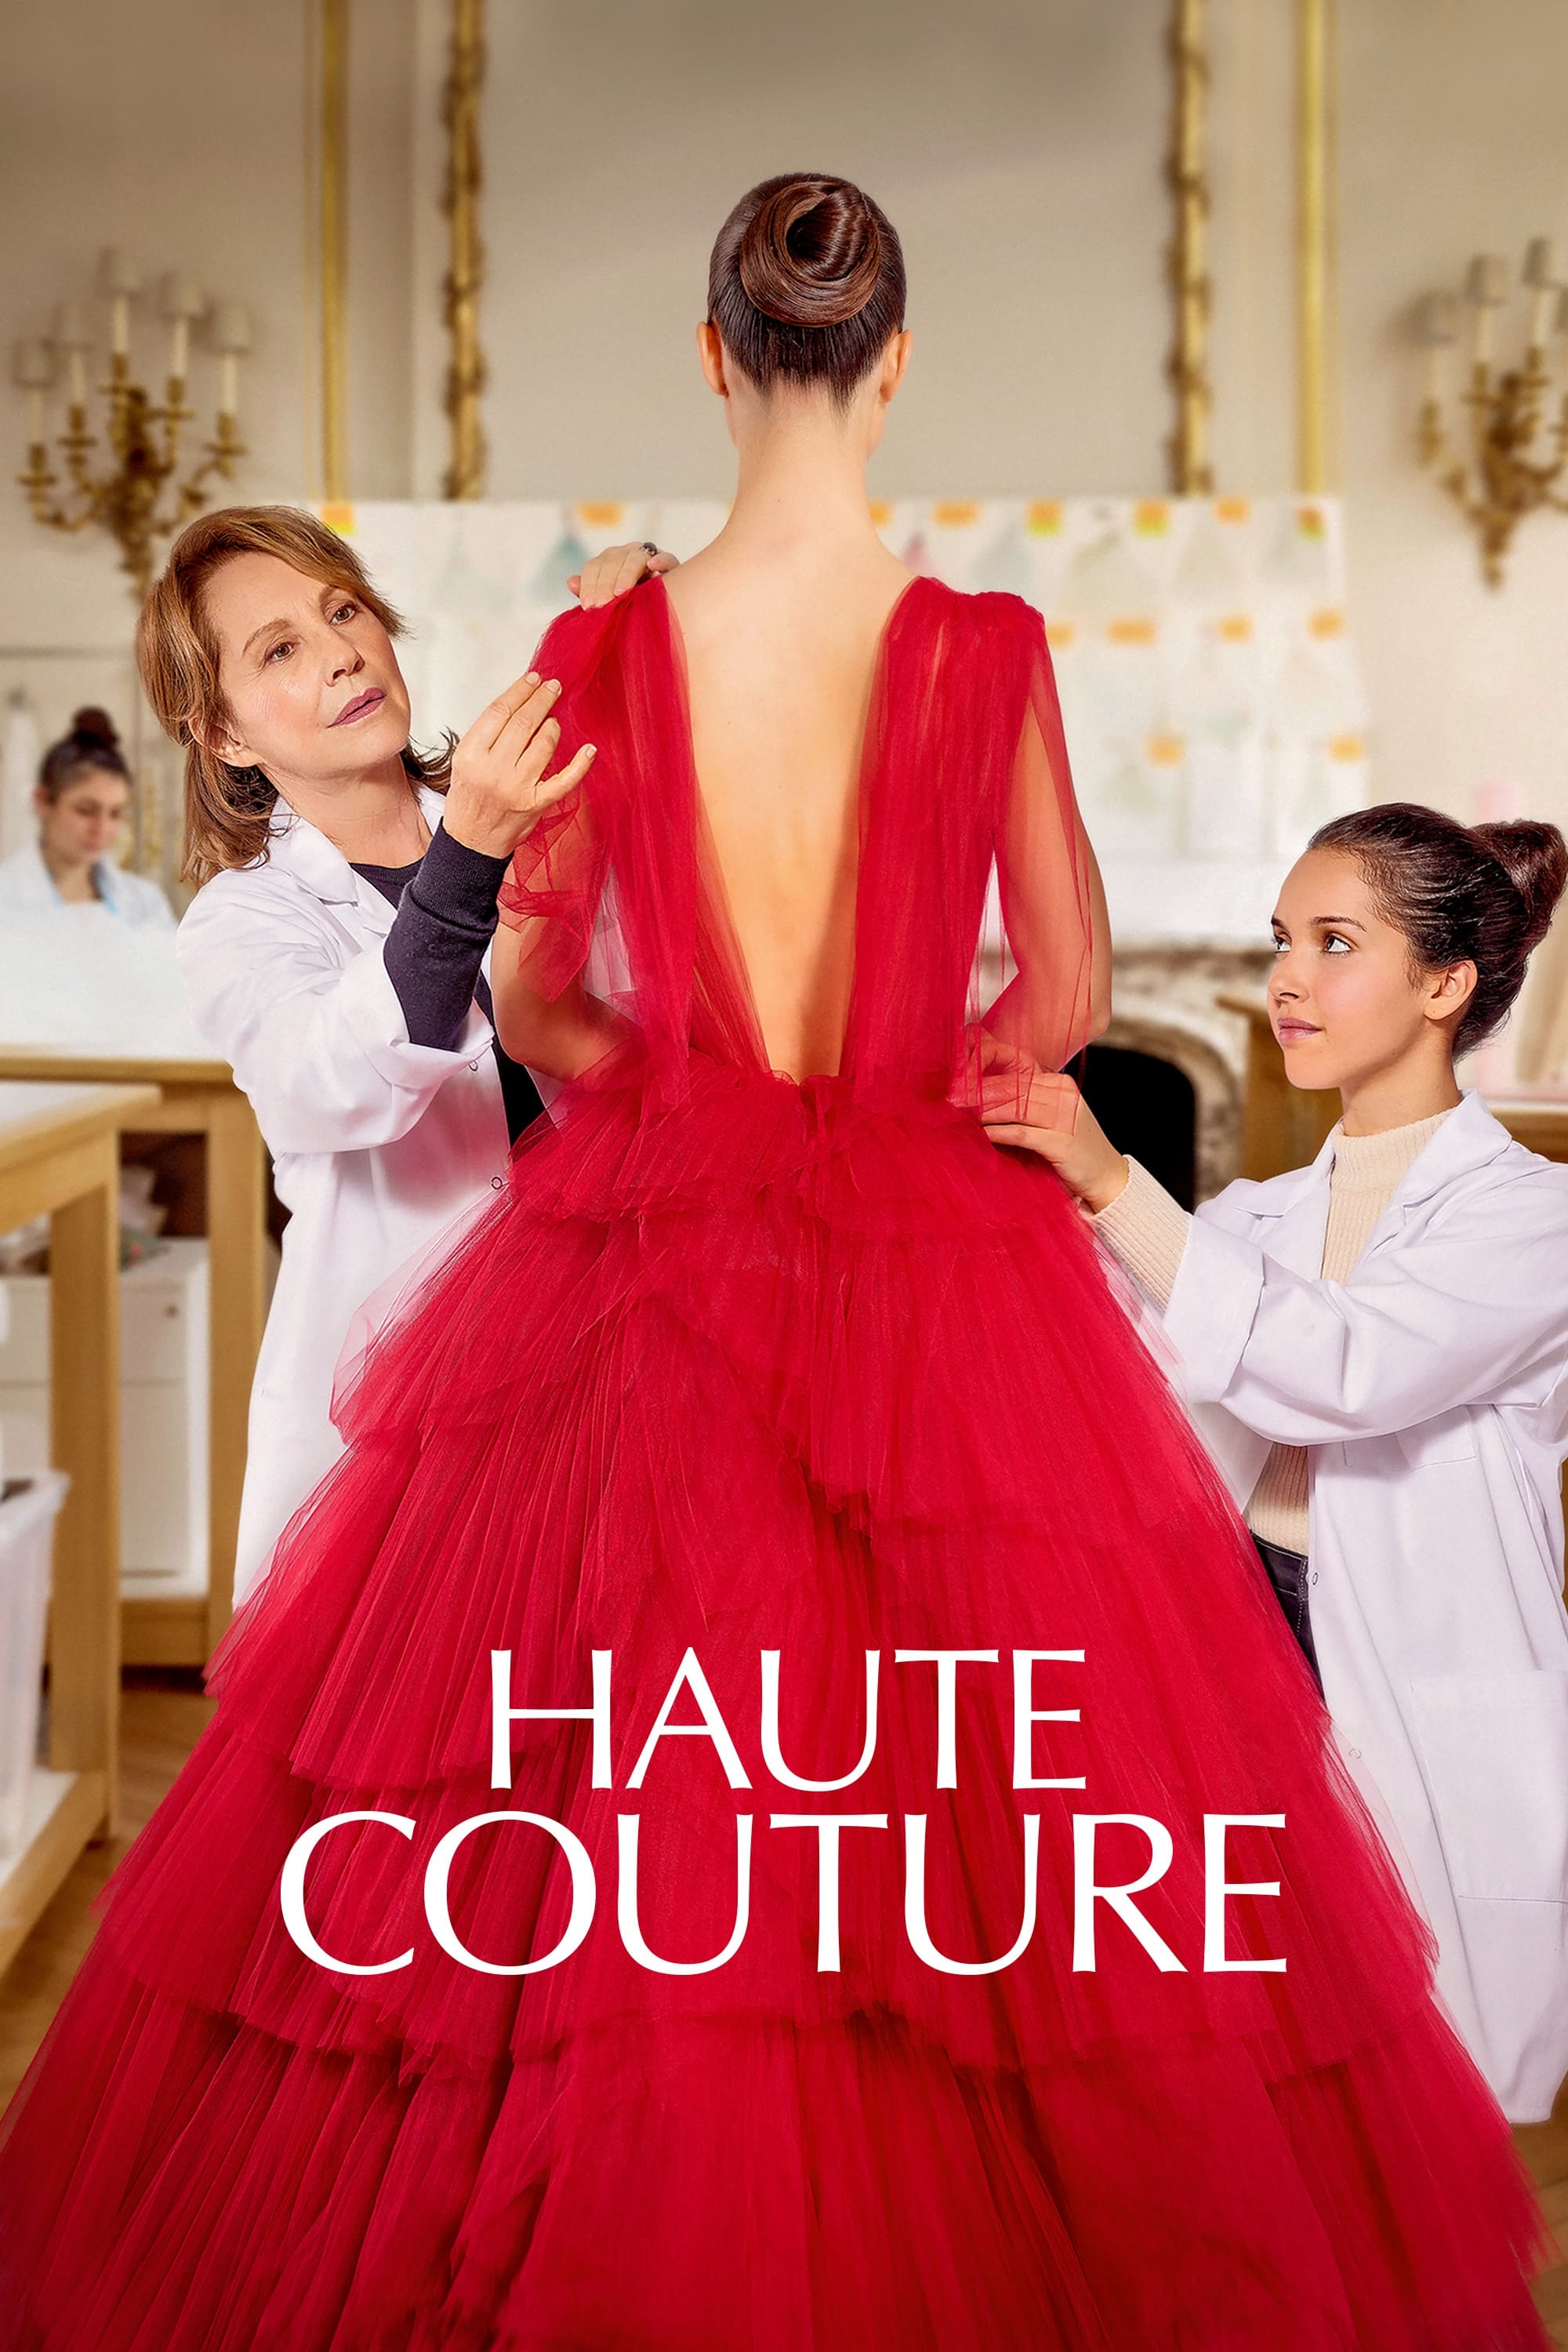 Haute couture streaming